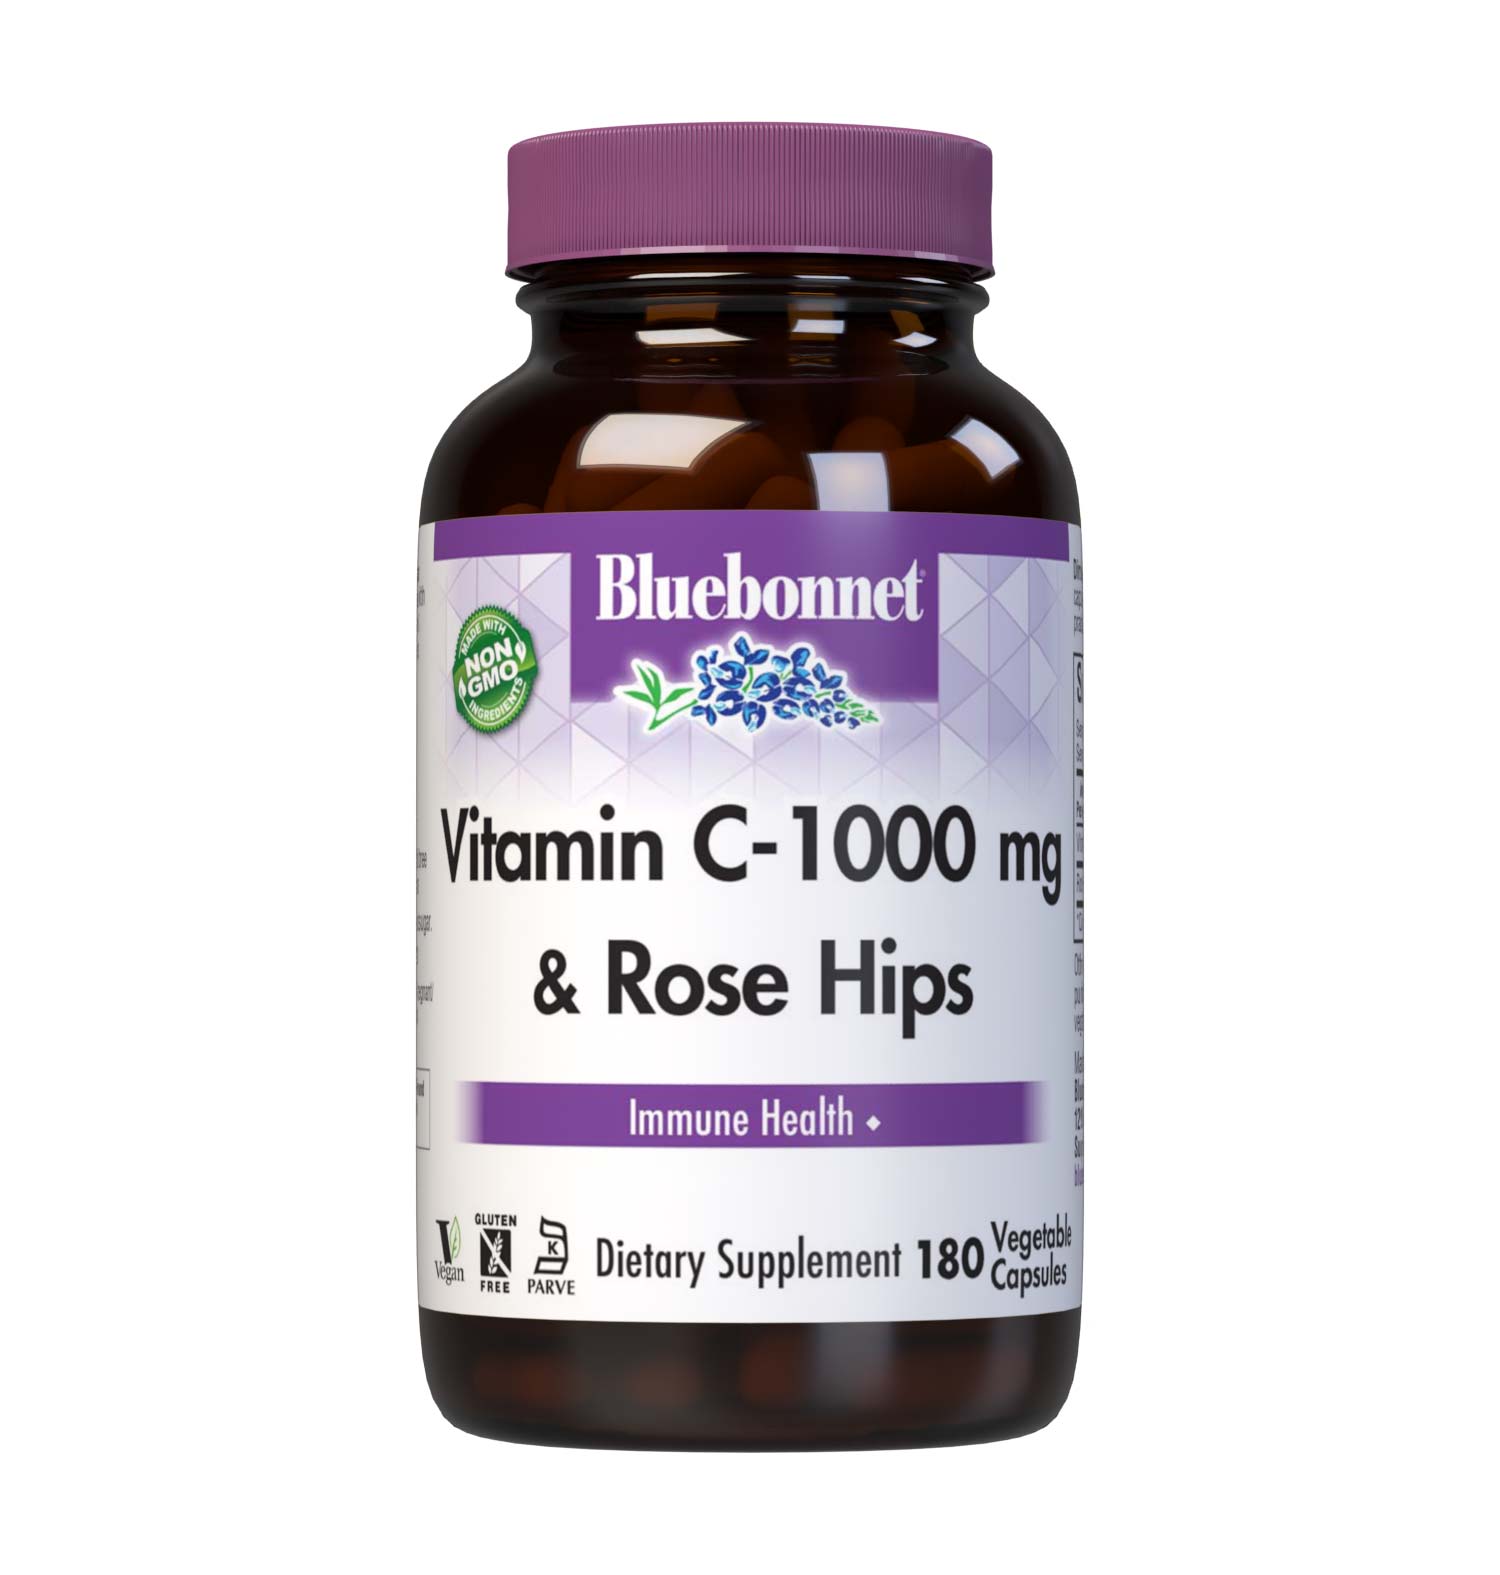 Bluebonnet’s Vitamin C-1000 mg & Rose Hips 180 Vegetable Capsules are formulated with non-GMO, identity preserved (IP) vitamin C from L-ascorbic acid and rose hips to help support immune function. #size_180 count